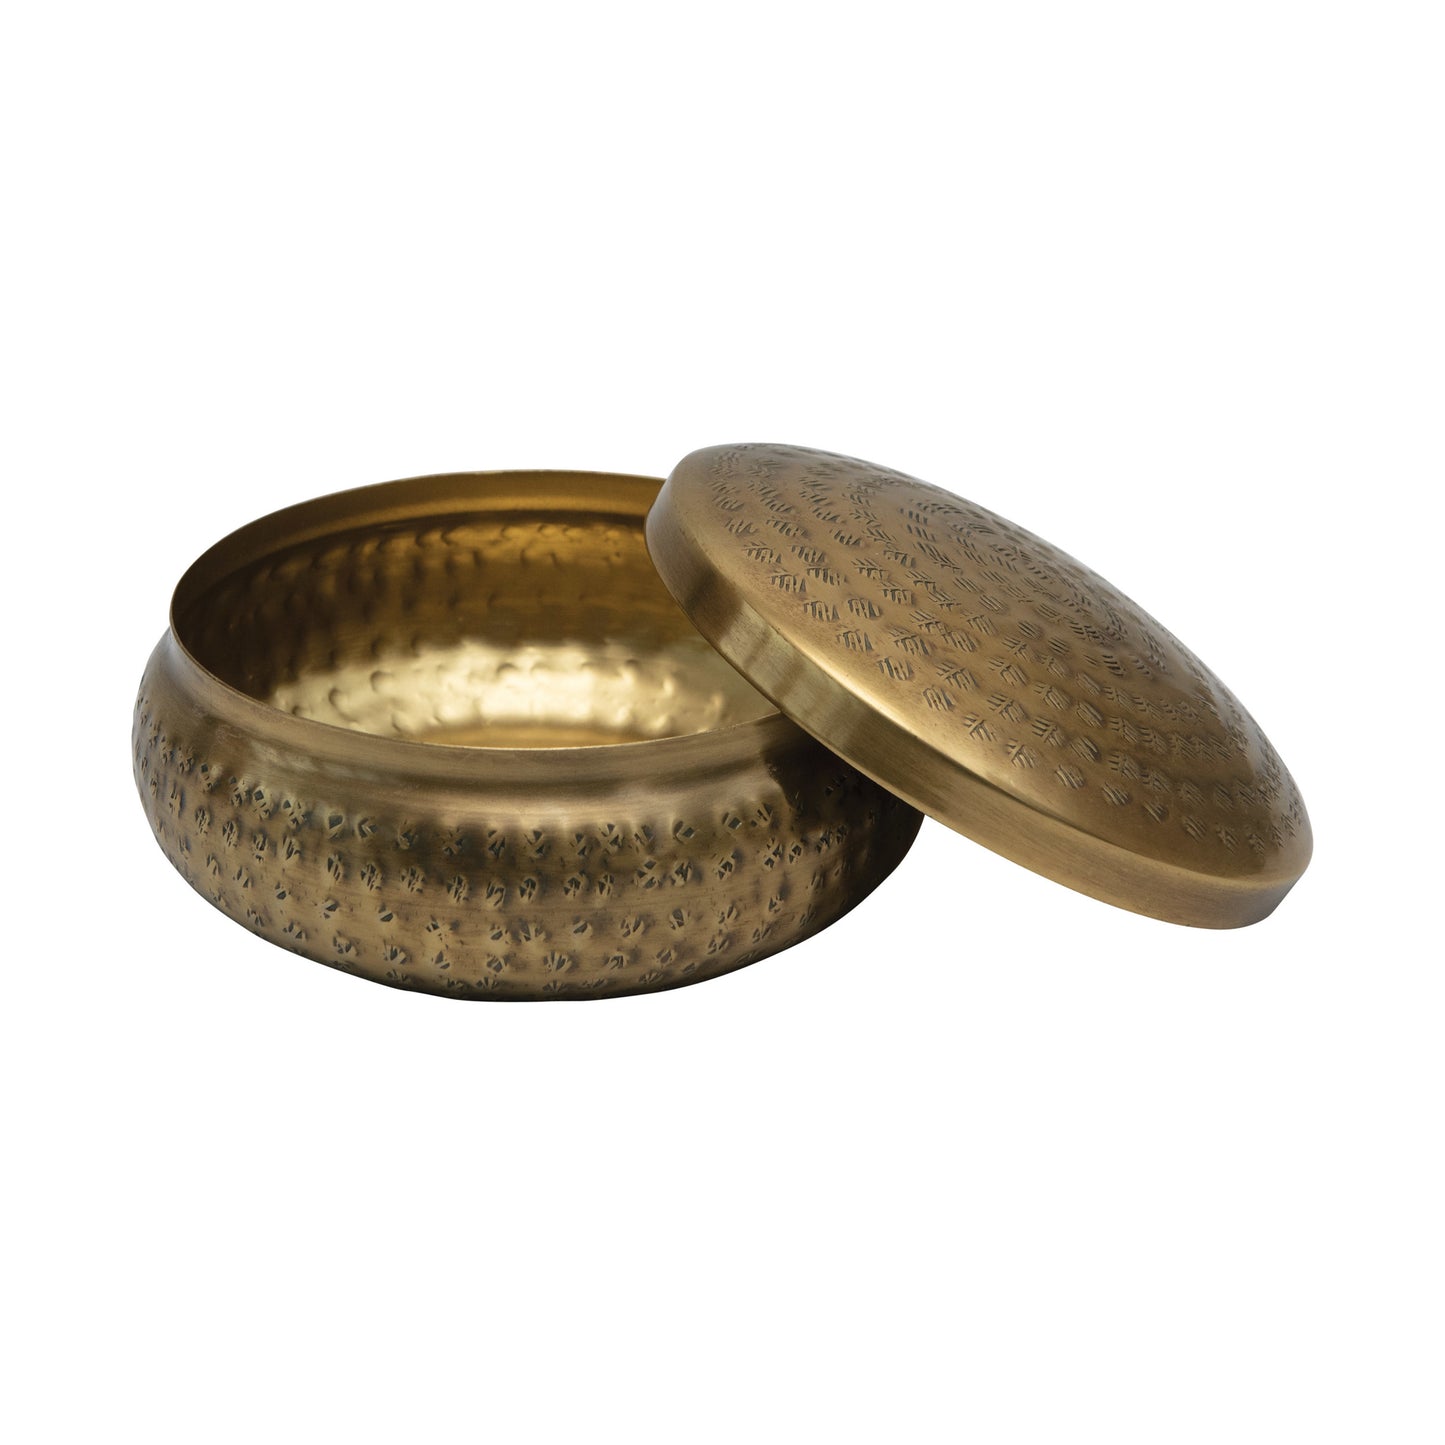 5" Round x 2"H Hammered Metal Container, Brass Finish